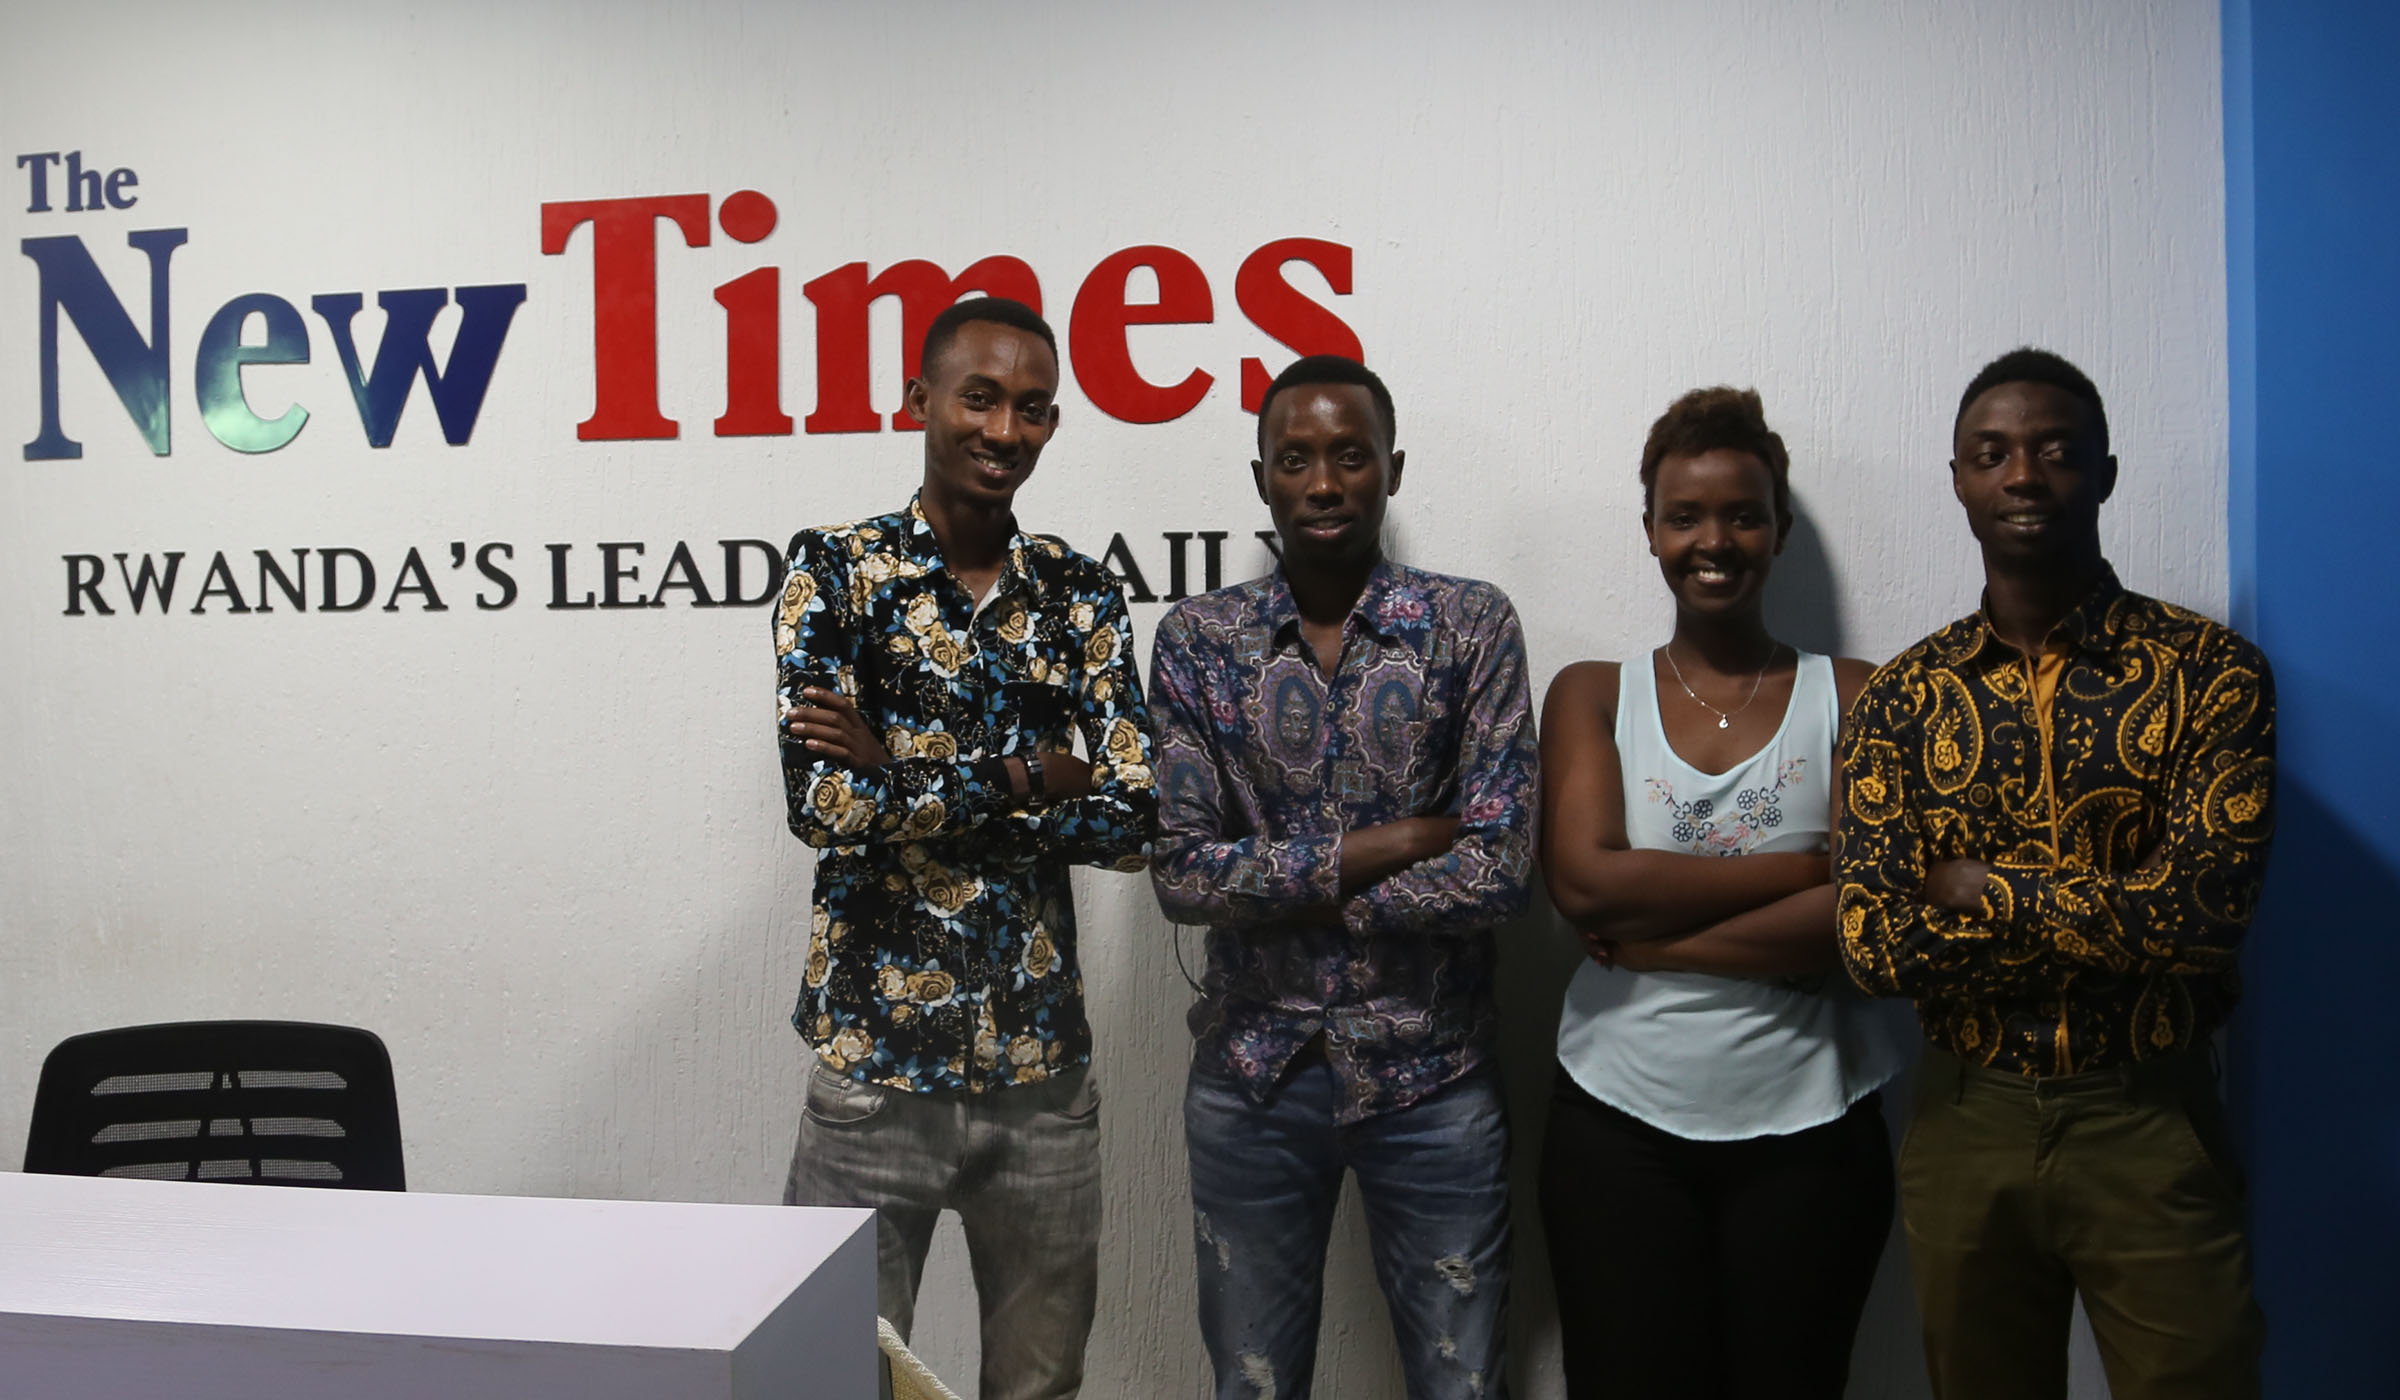 Daymakers Edutainment at The New Times offices on Tuesday. Photo by Craish Bahizi. 